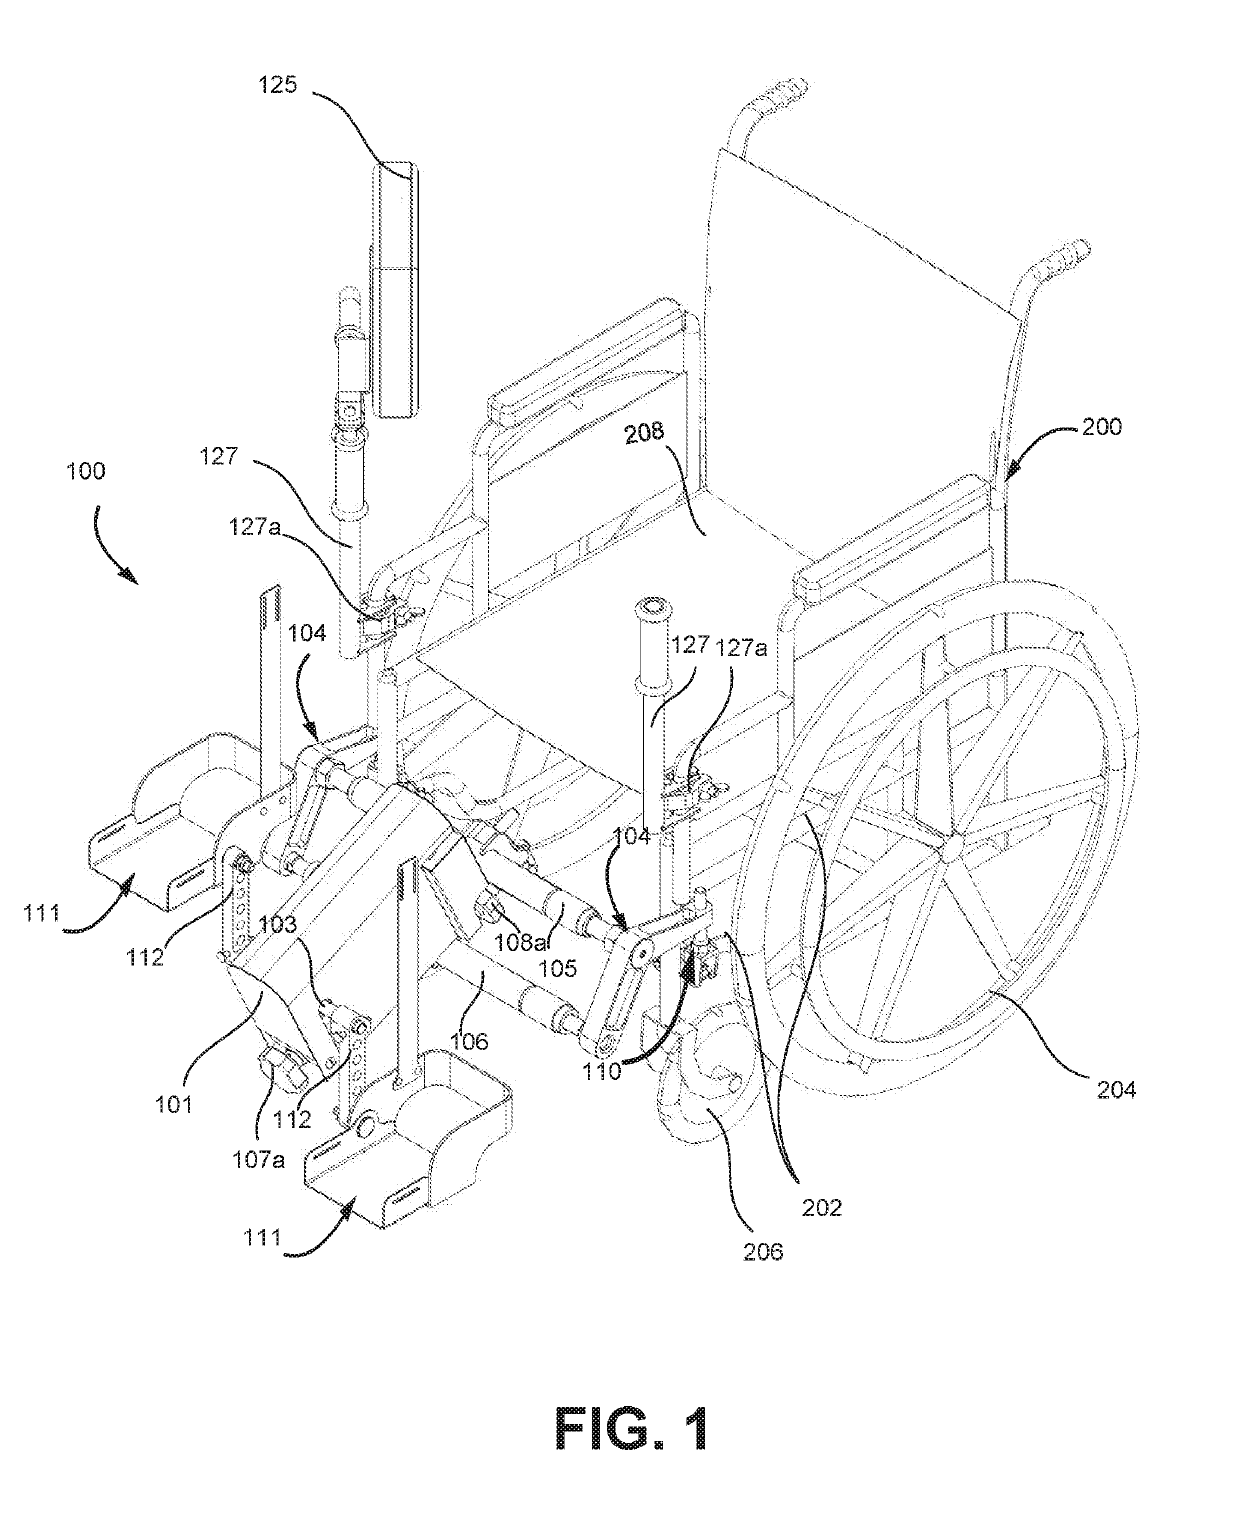 Simulator system and method for exercising lower limbs of a user seated on a wheelchair or like vehicular system